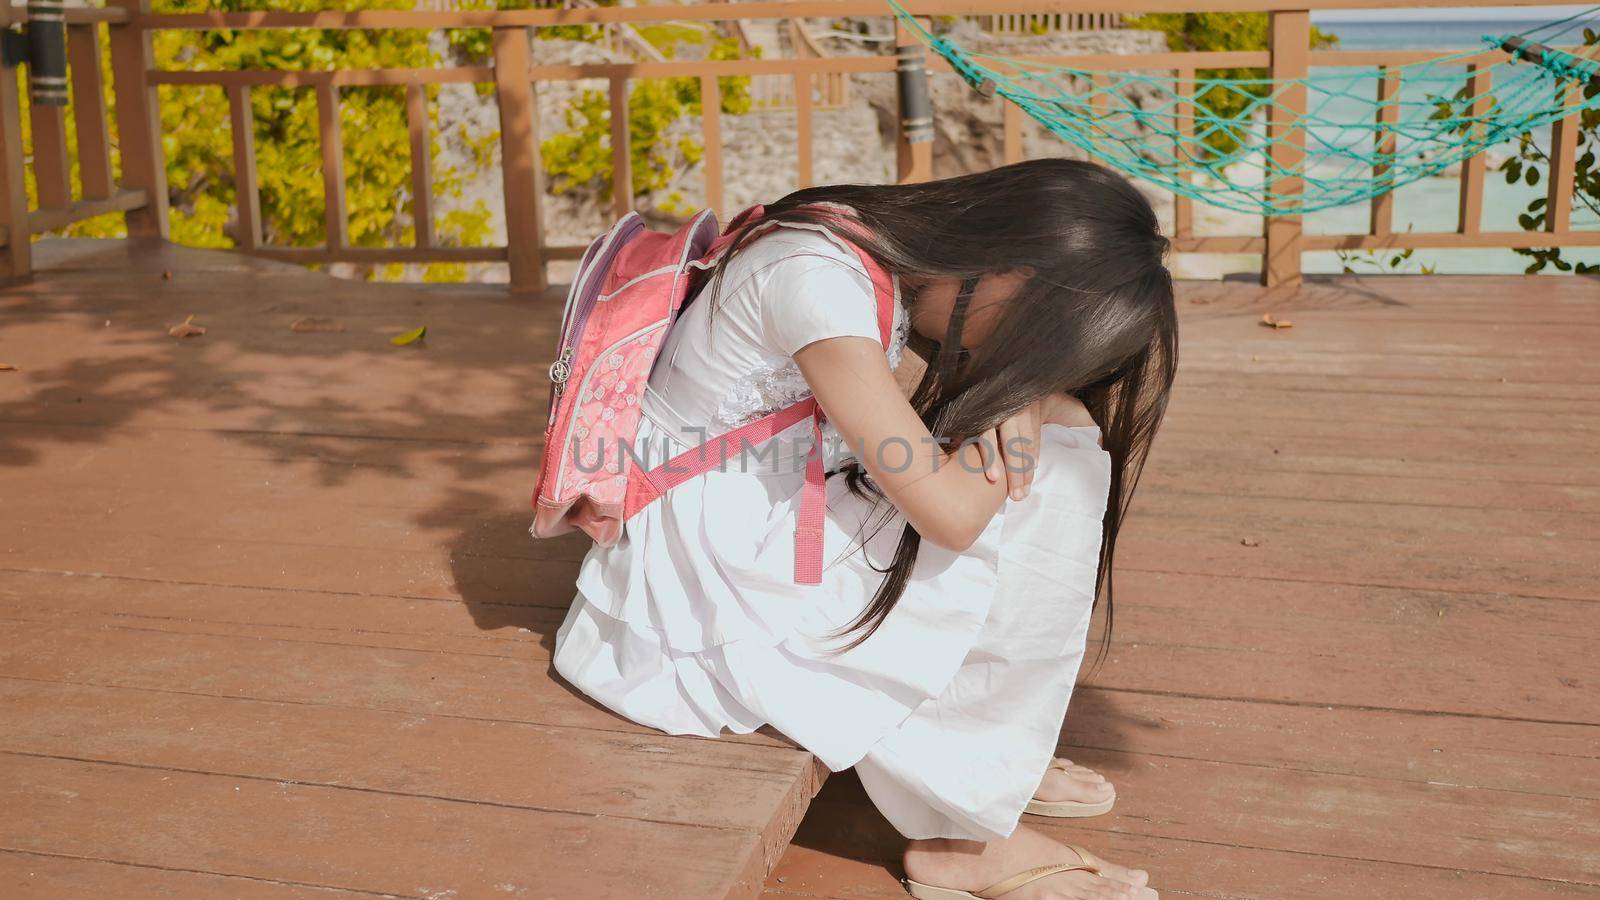 An philippine schoolgirl girl with a backpack is sitting and crying near the tropical coast. Sad mood